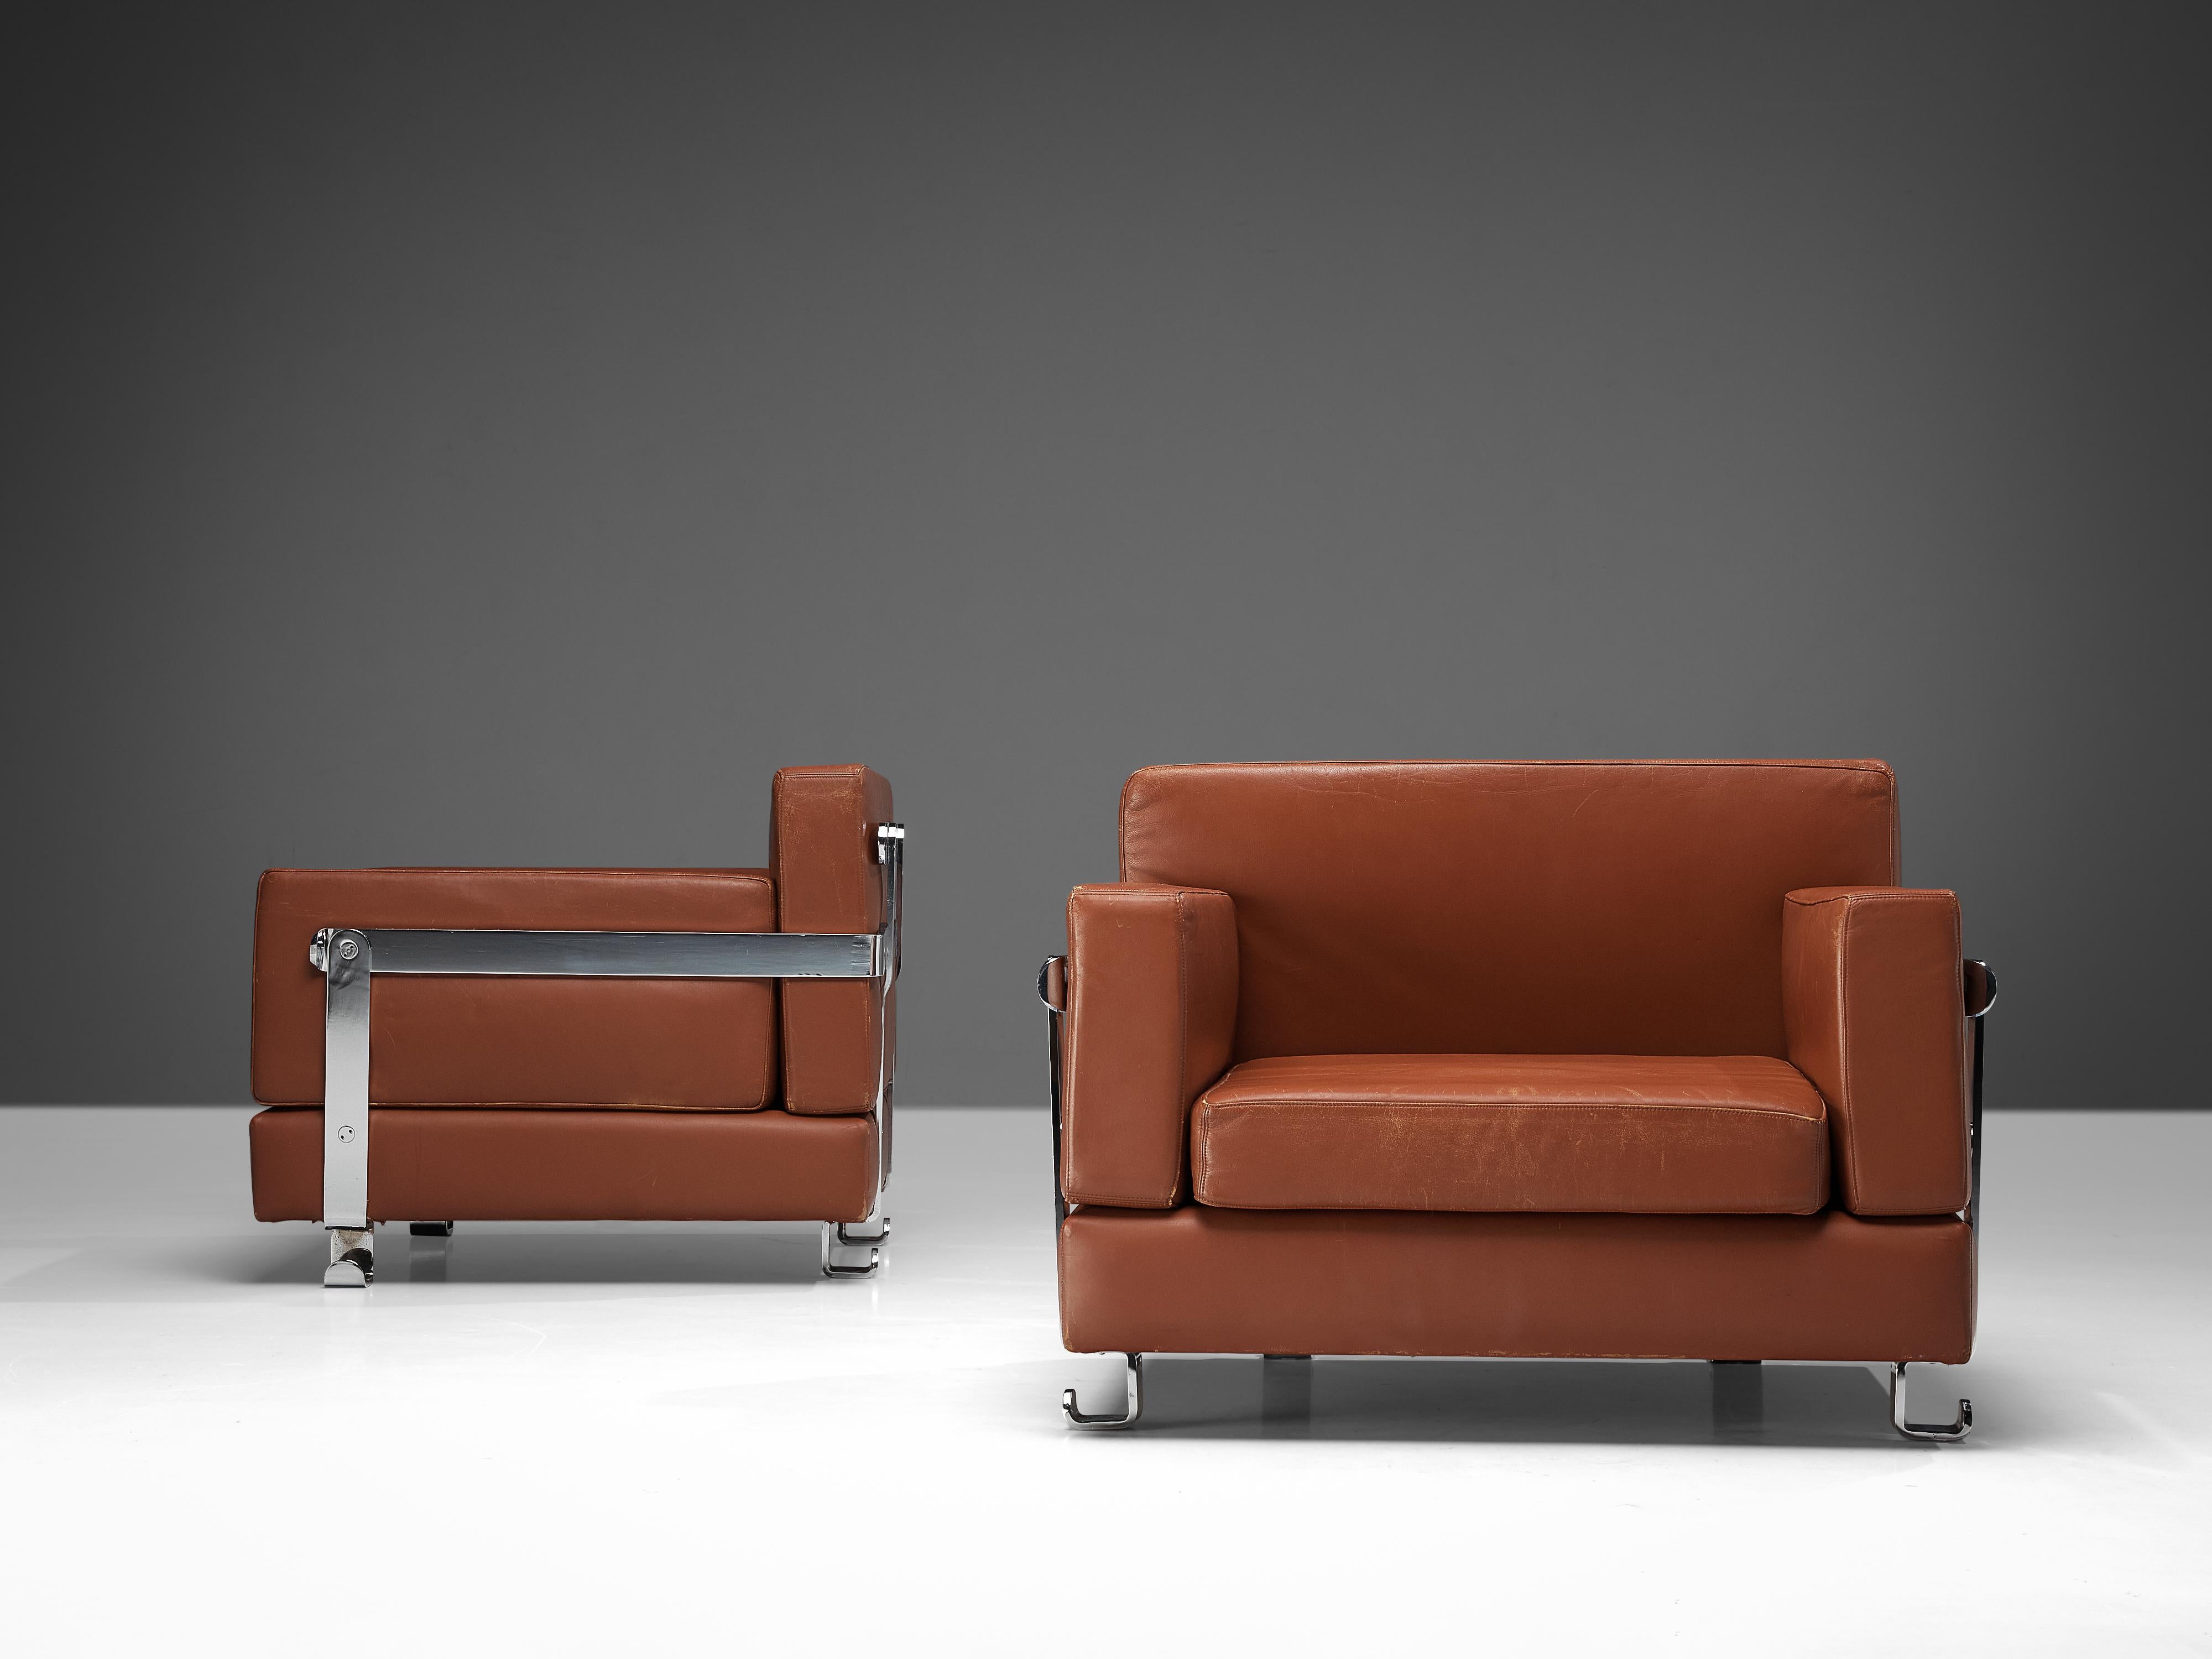 Metal Luigi C. Dominioni for Azucena Pair of Lounge Chairs in Leather